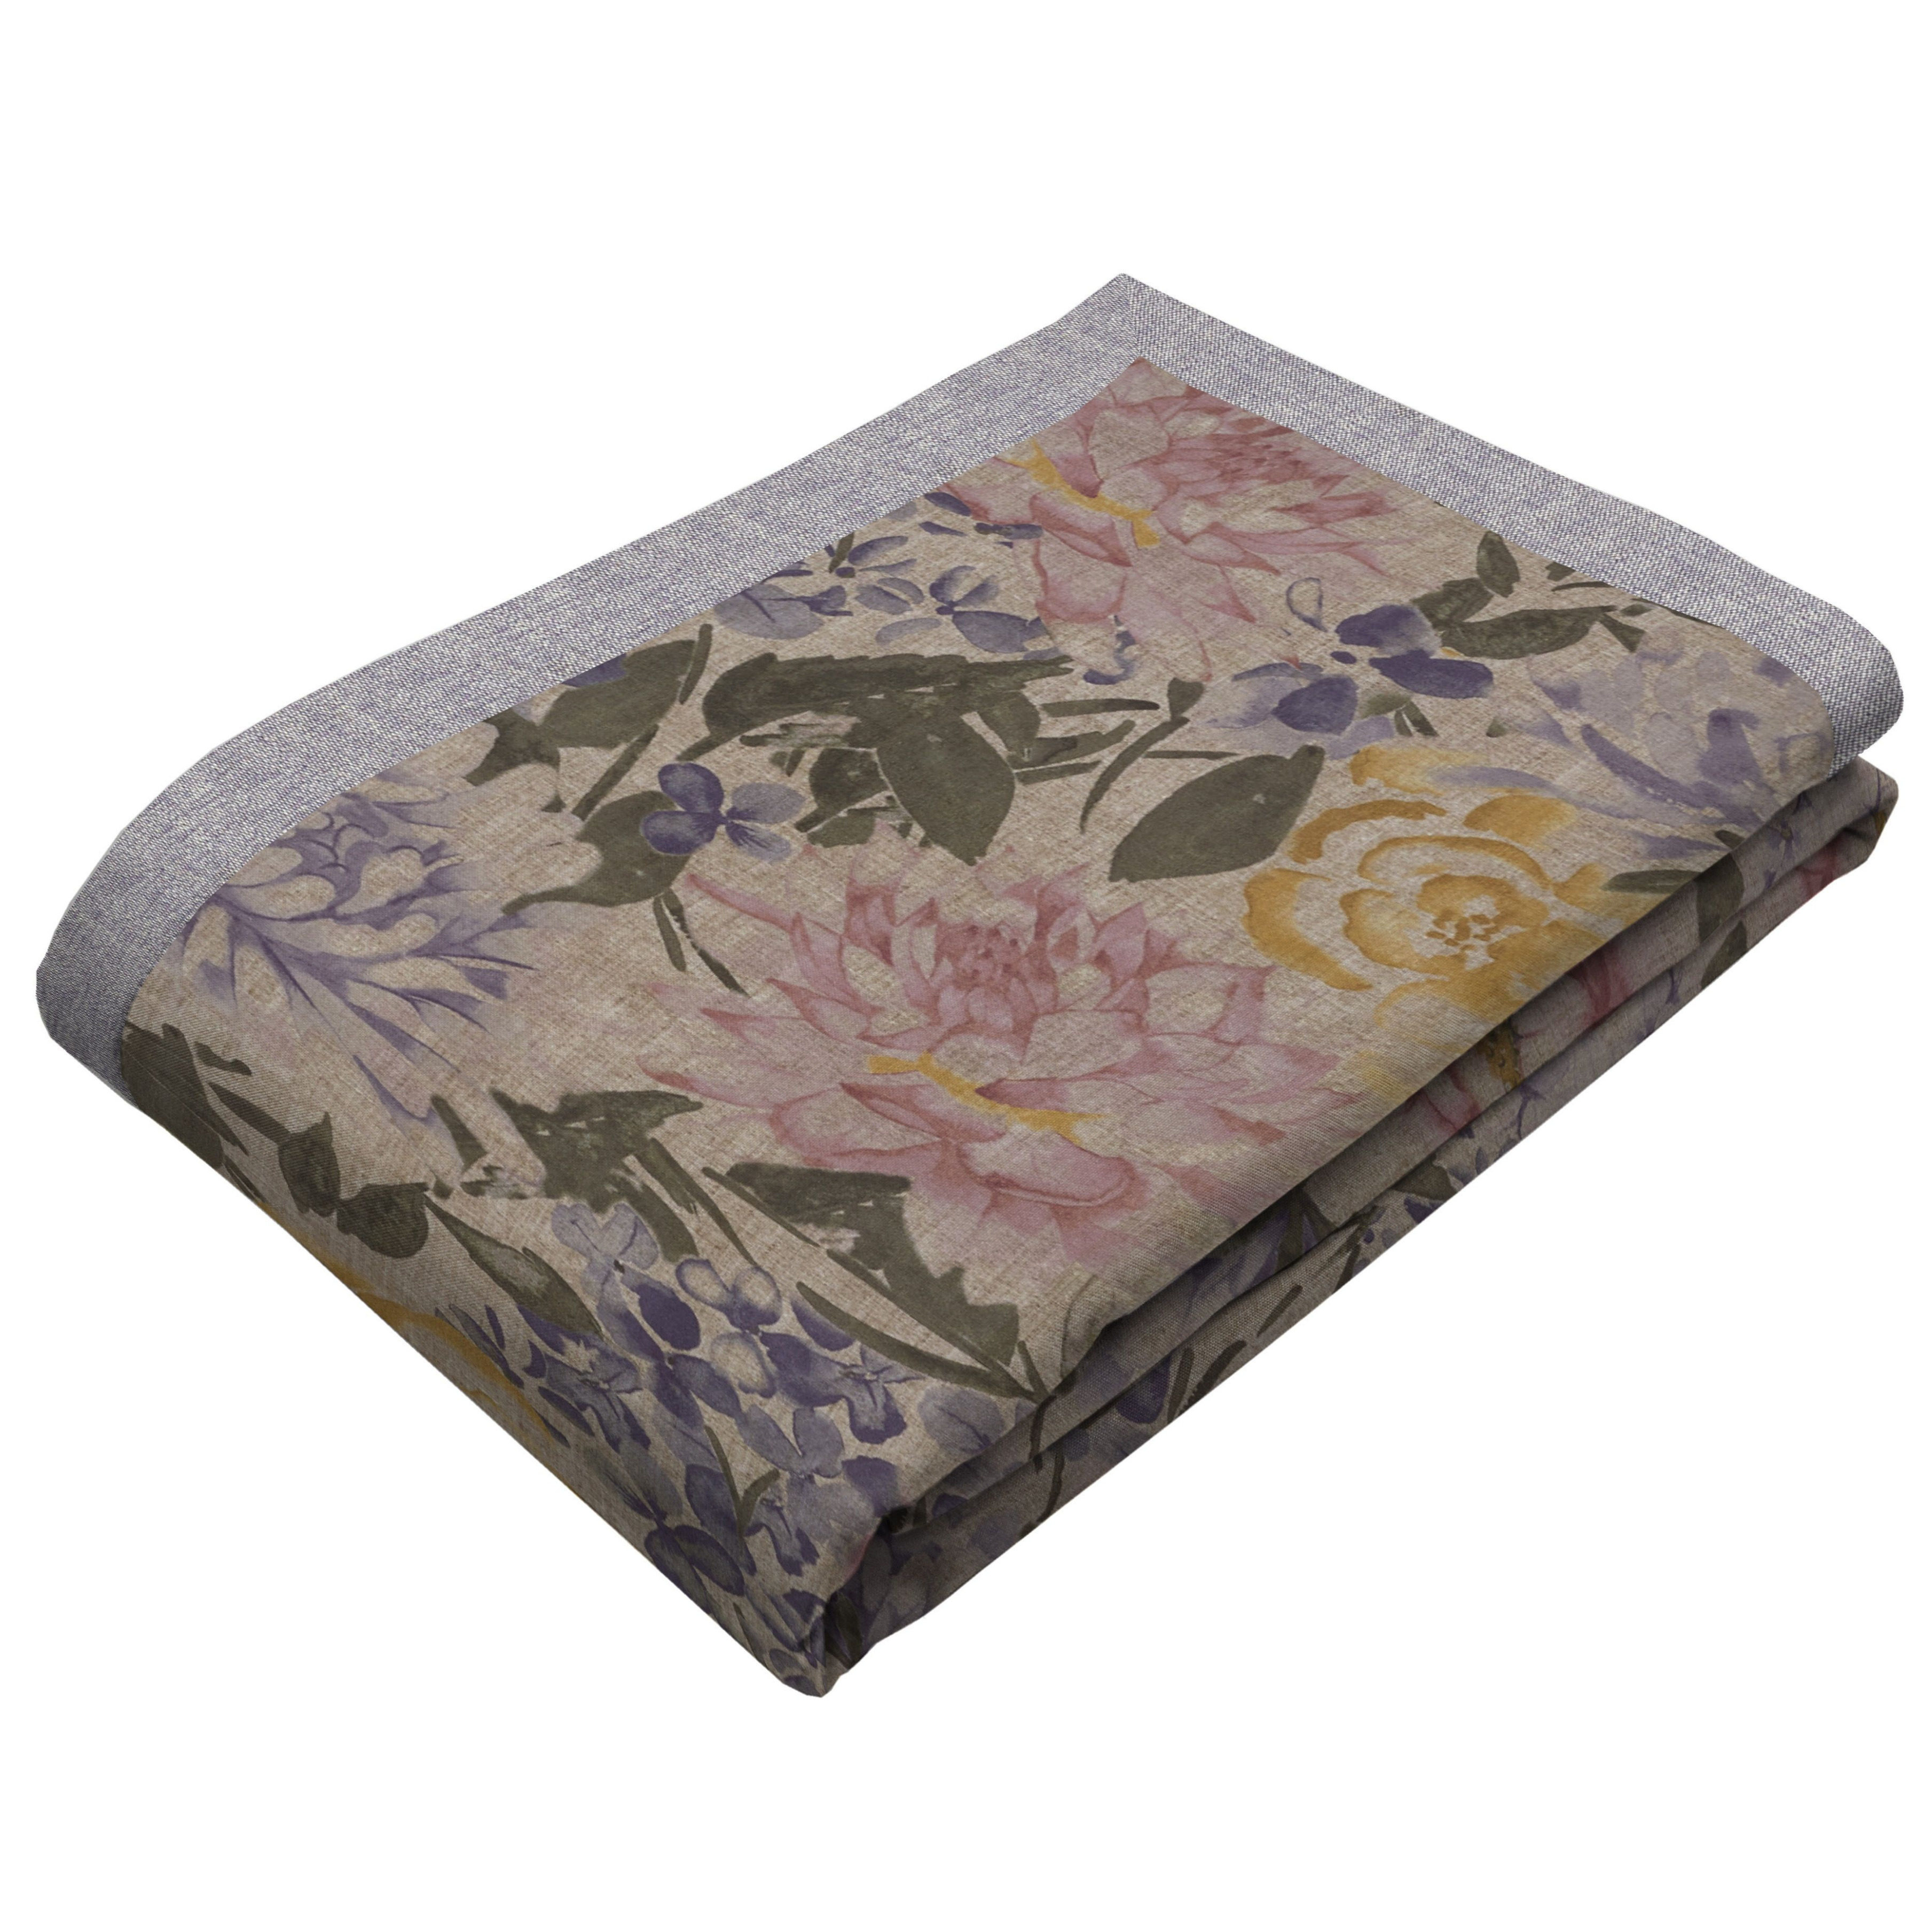 Blooma Purple, Pink and Ochre Floral Throw Blanket & Runners, XX-Large (265cm x 380cm)